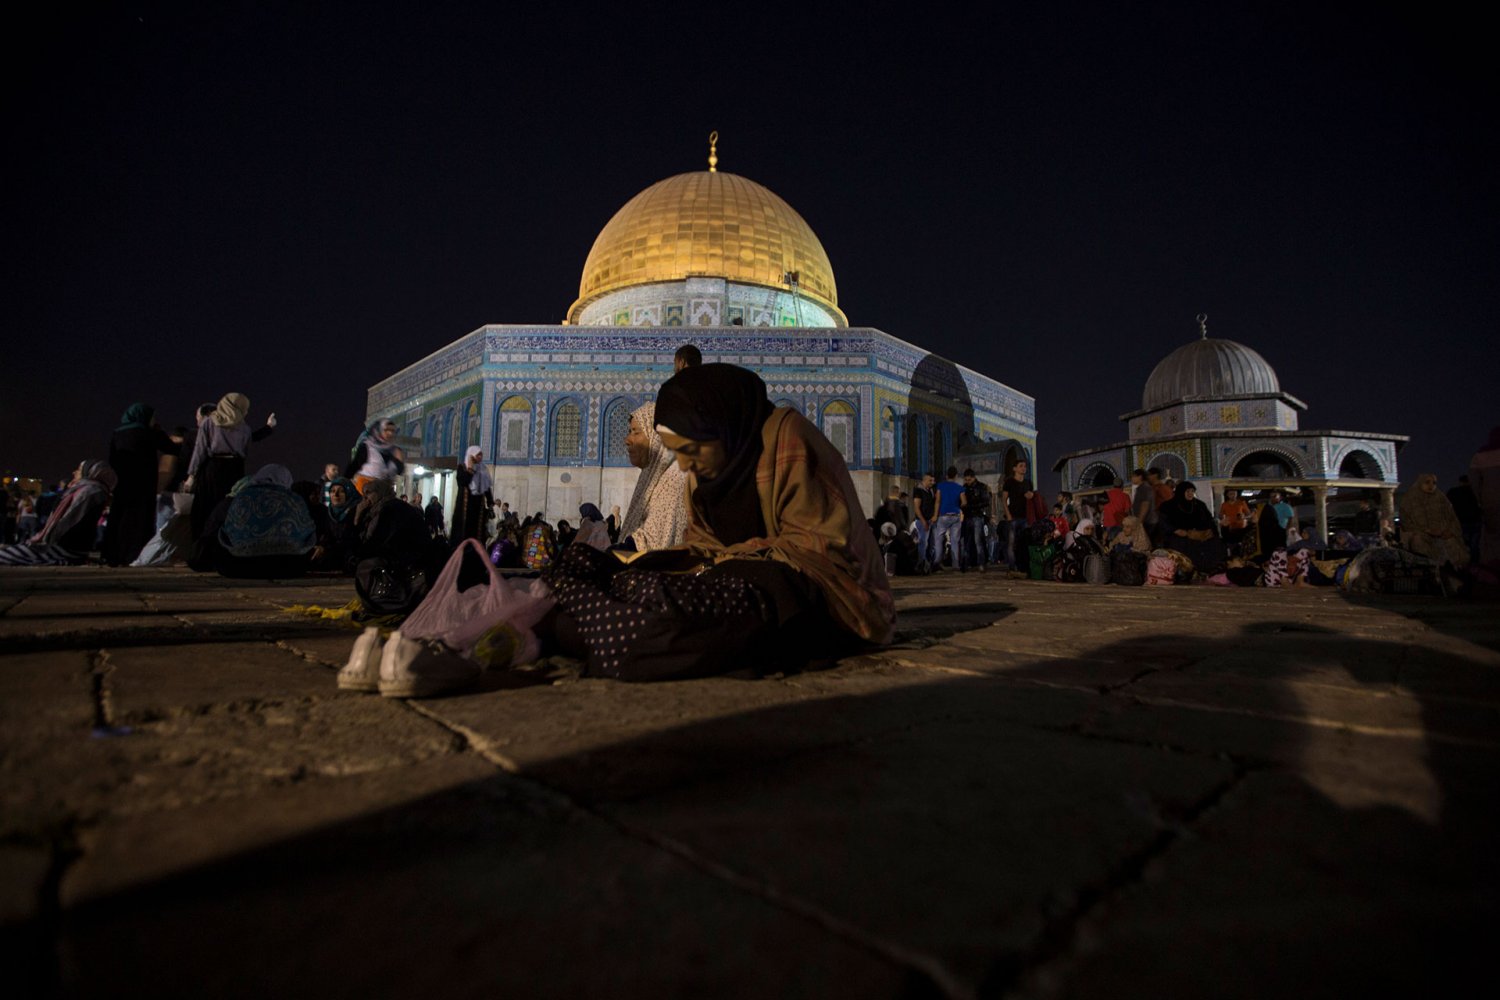 Women sit in the courtyard of al-Aqsa Mosque on the night believed to be Laylat al-Qadr, the holiest night of the year for Muslims, July 13, 2015.